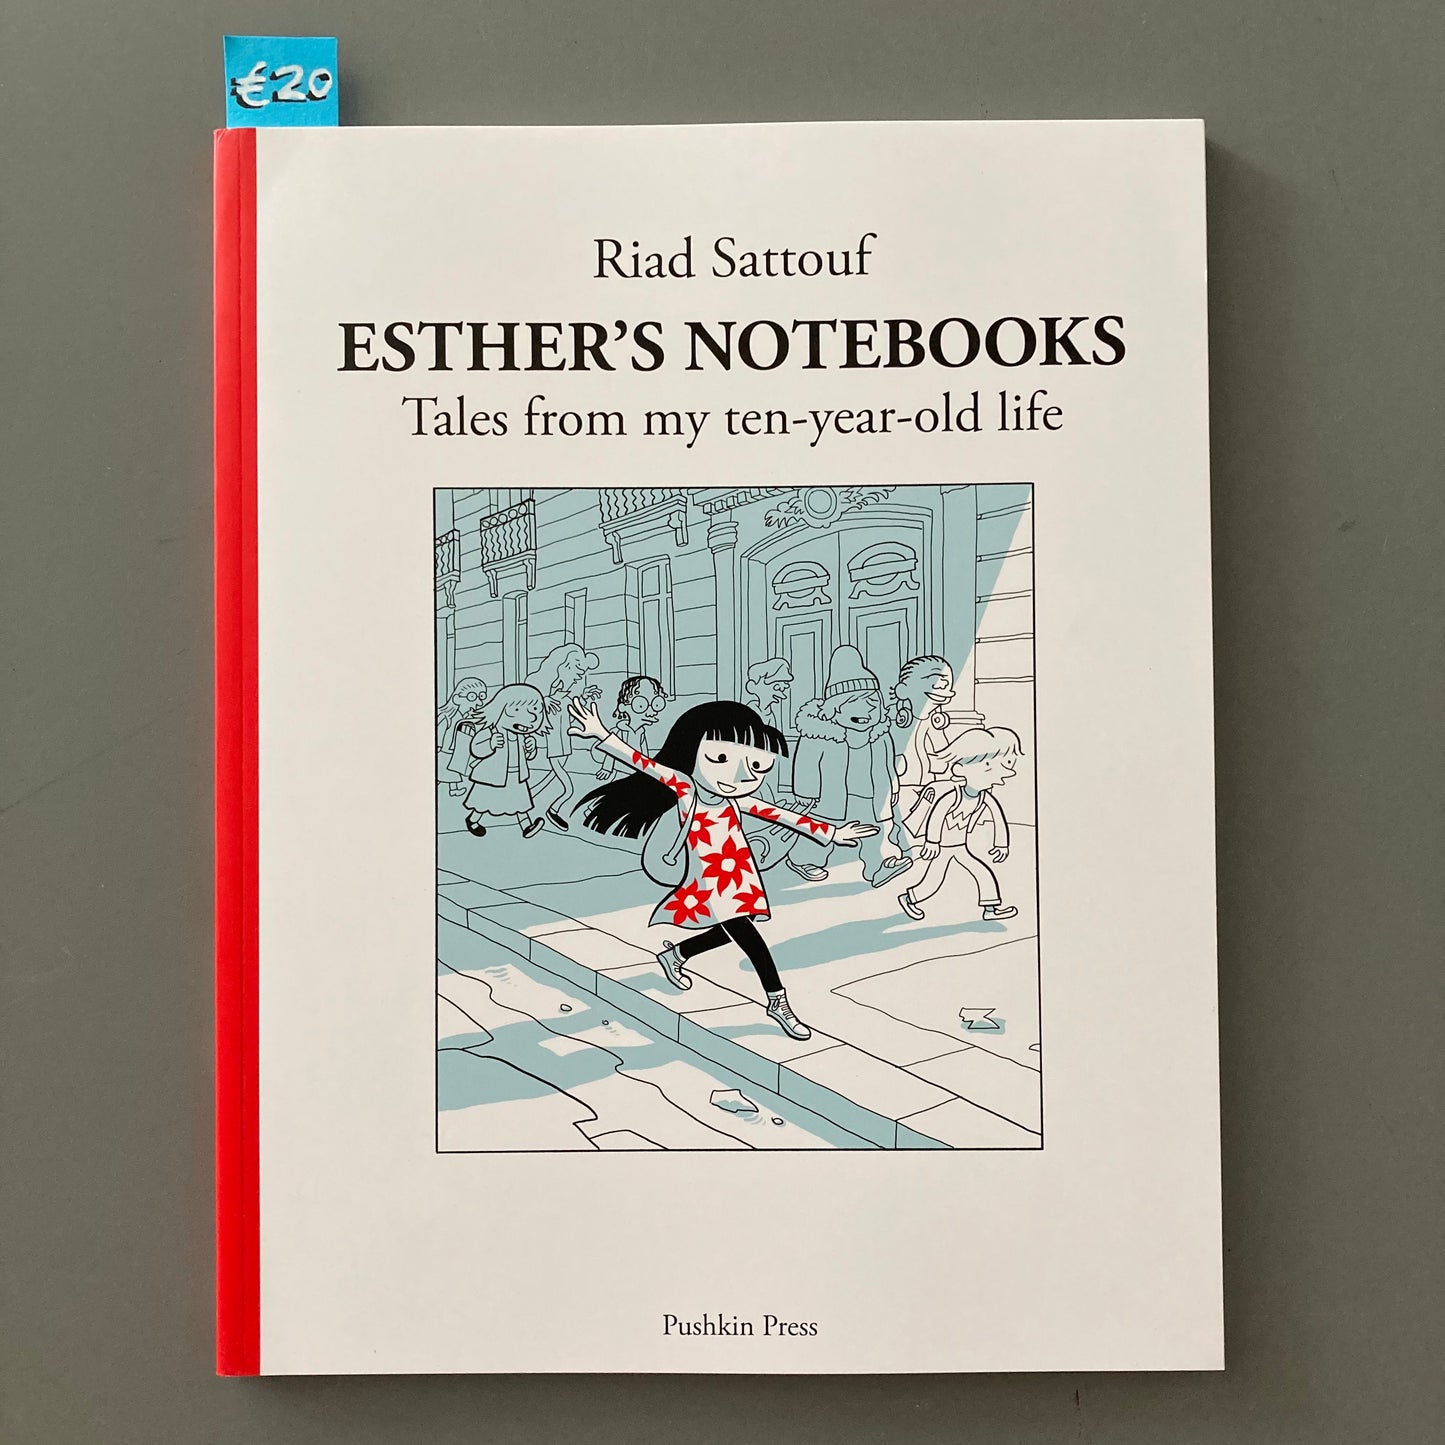 Esther’s Notebooks: Tales from my ten-year-old life